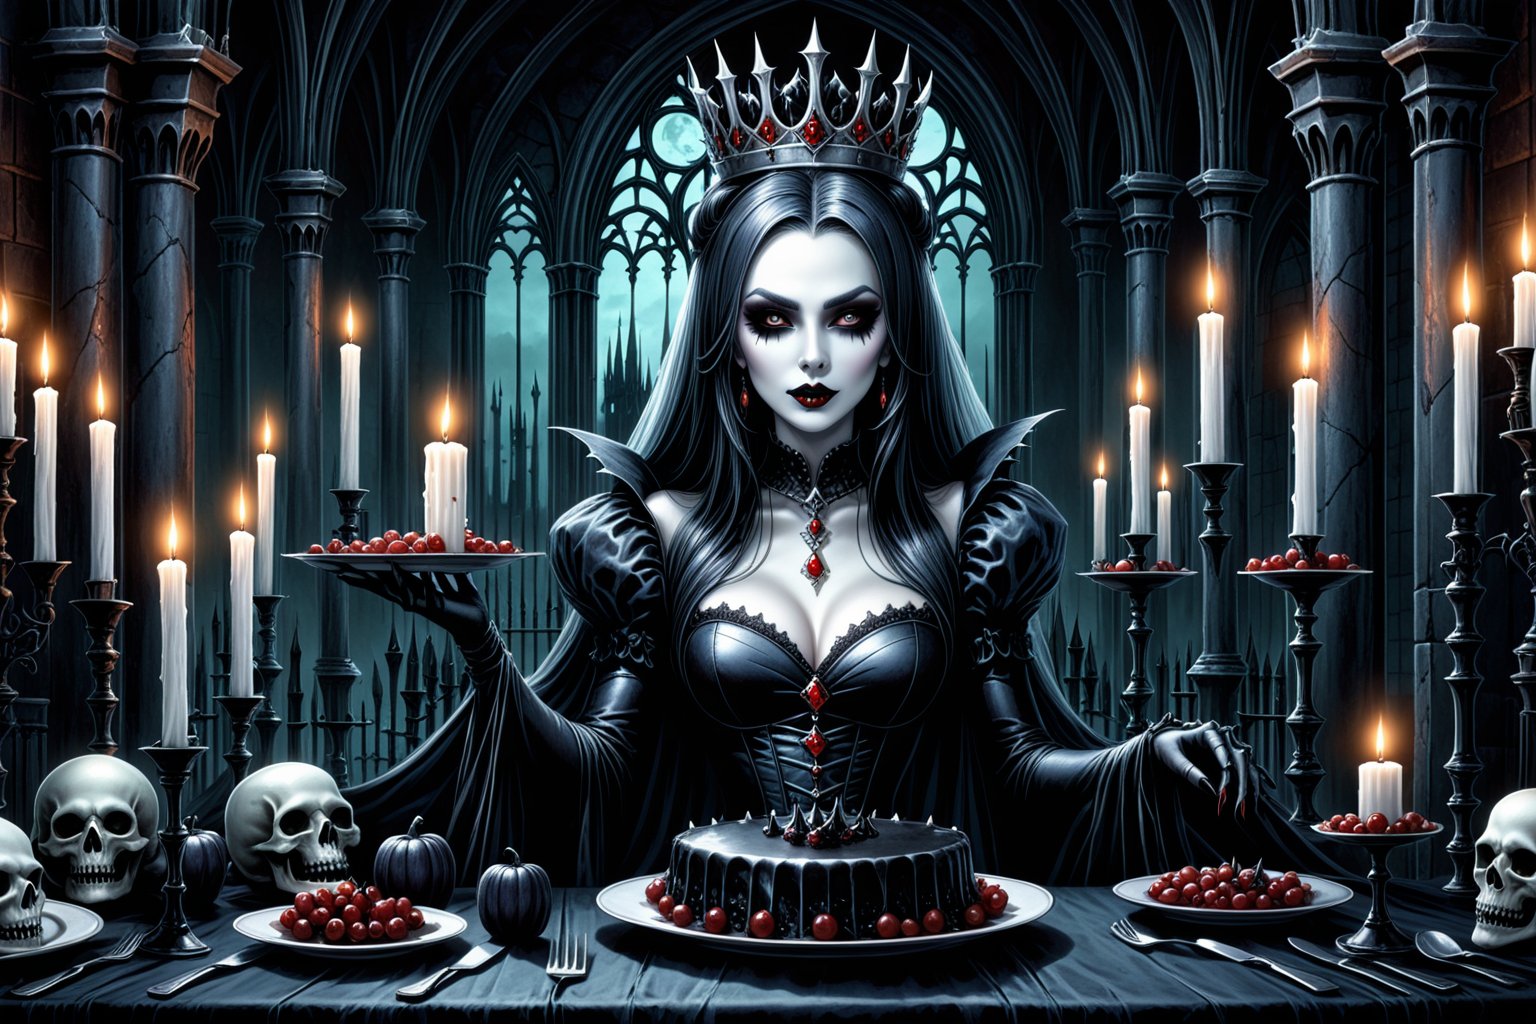 A hauntingly beautiful undead queen monster has diner with her monsters guests in a gothic castle. candles light.